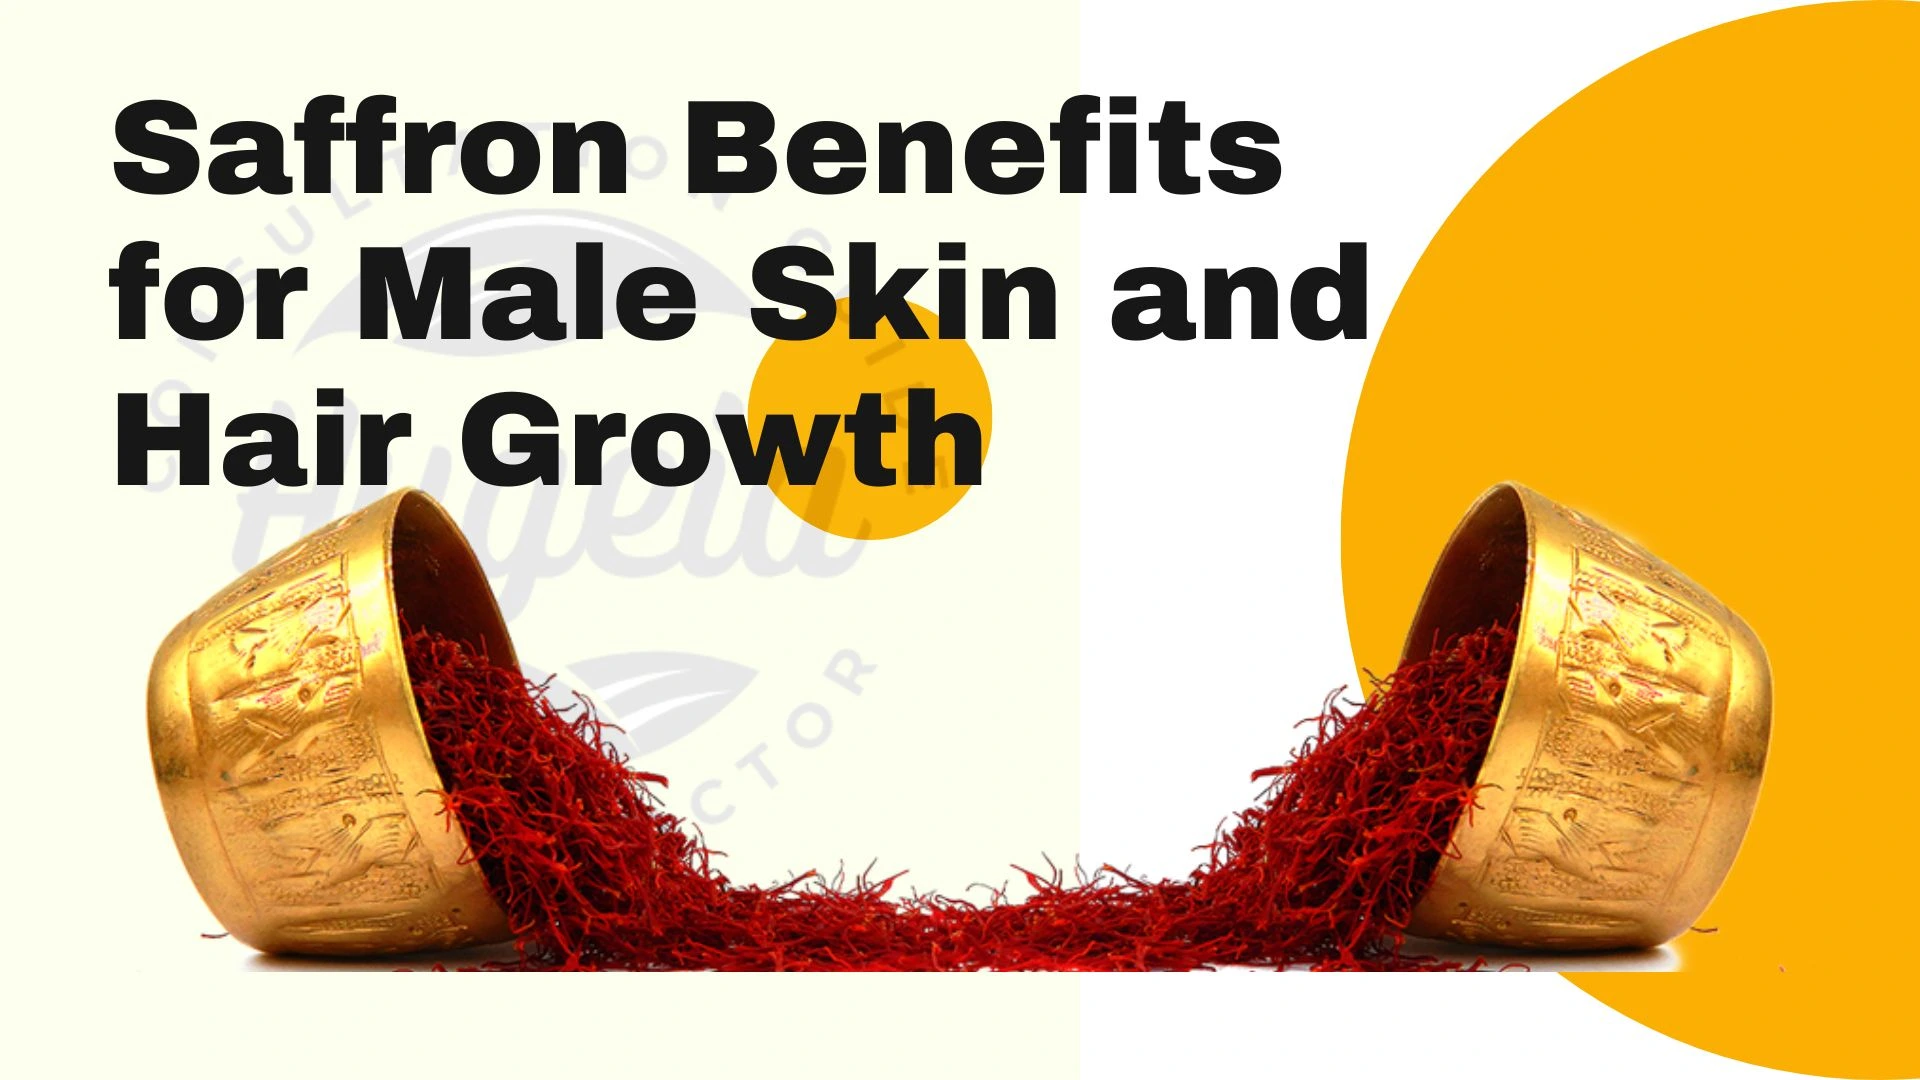 Saffron Benefits for Male Skin and Hair Growth